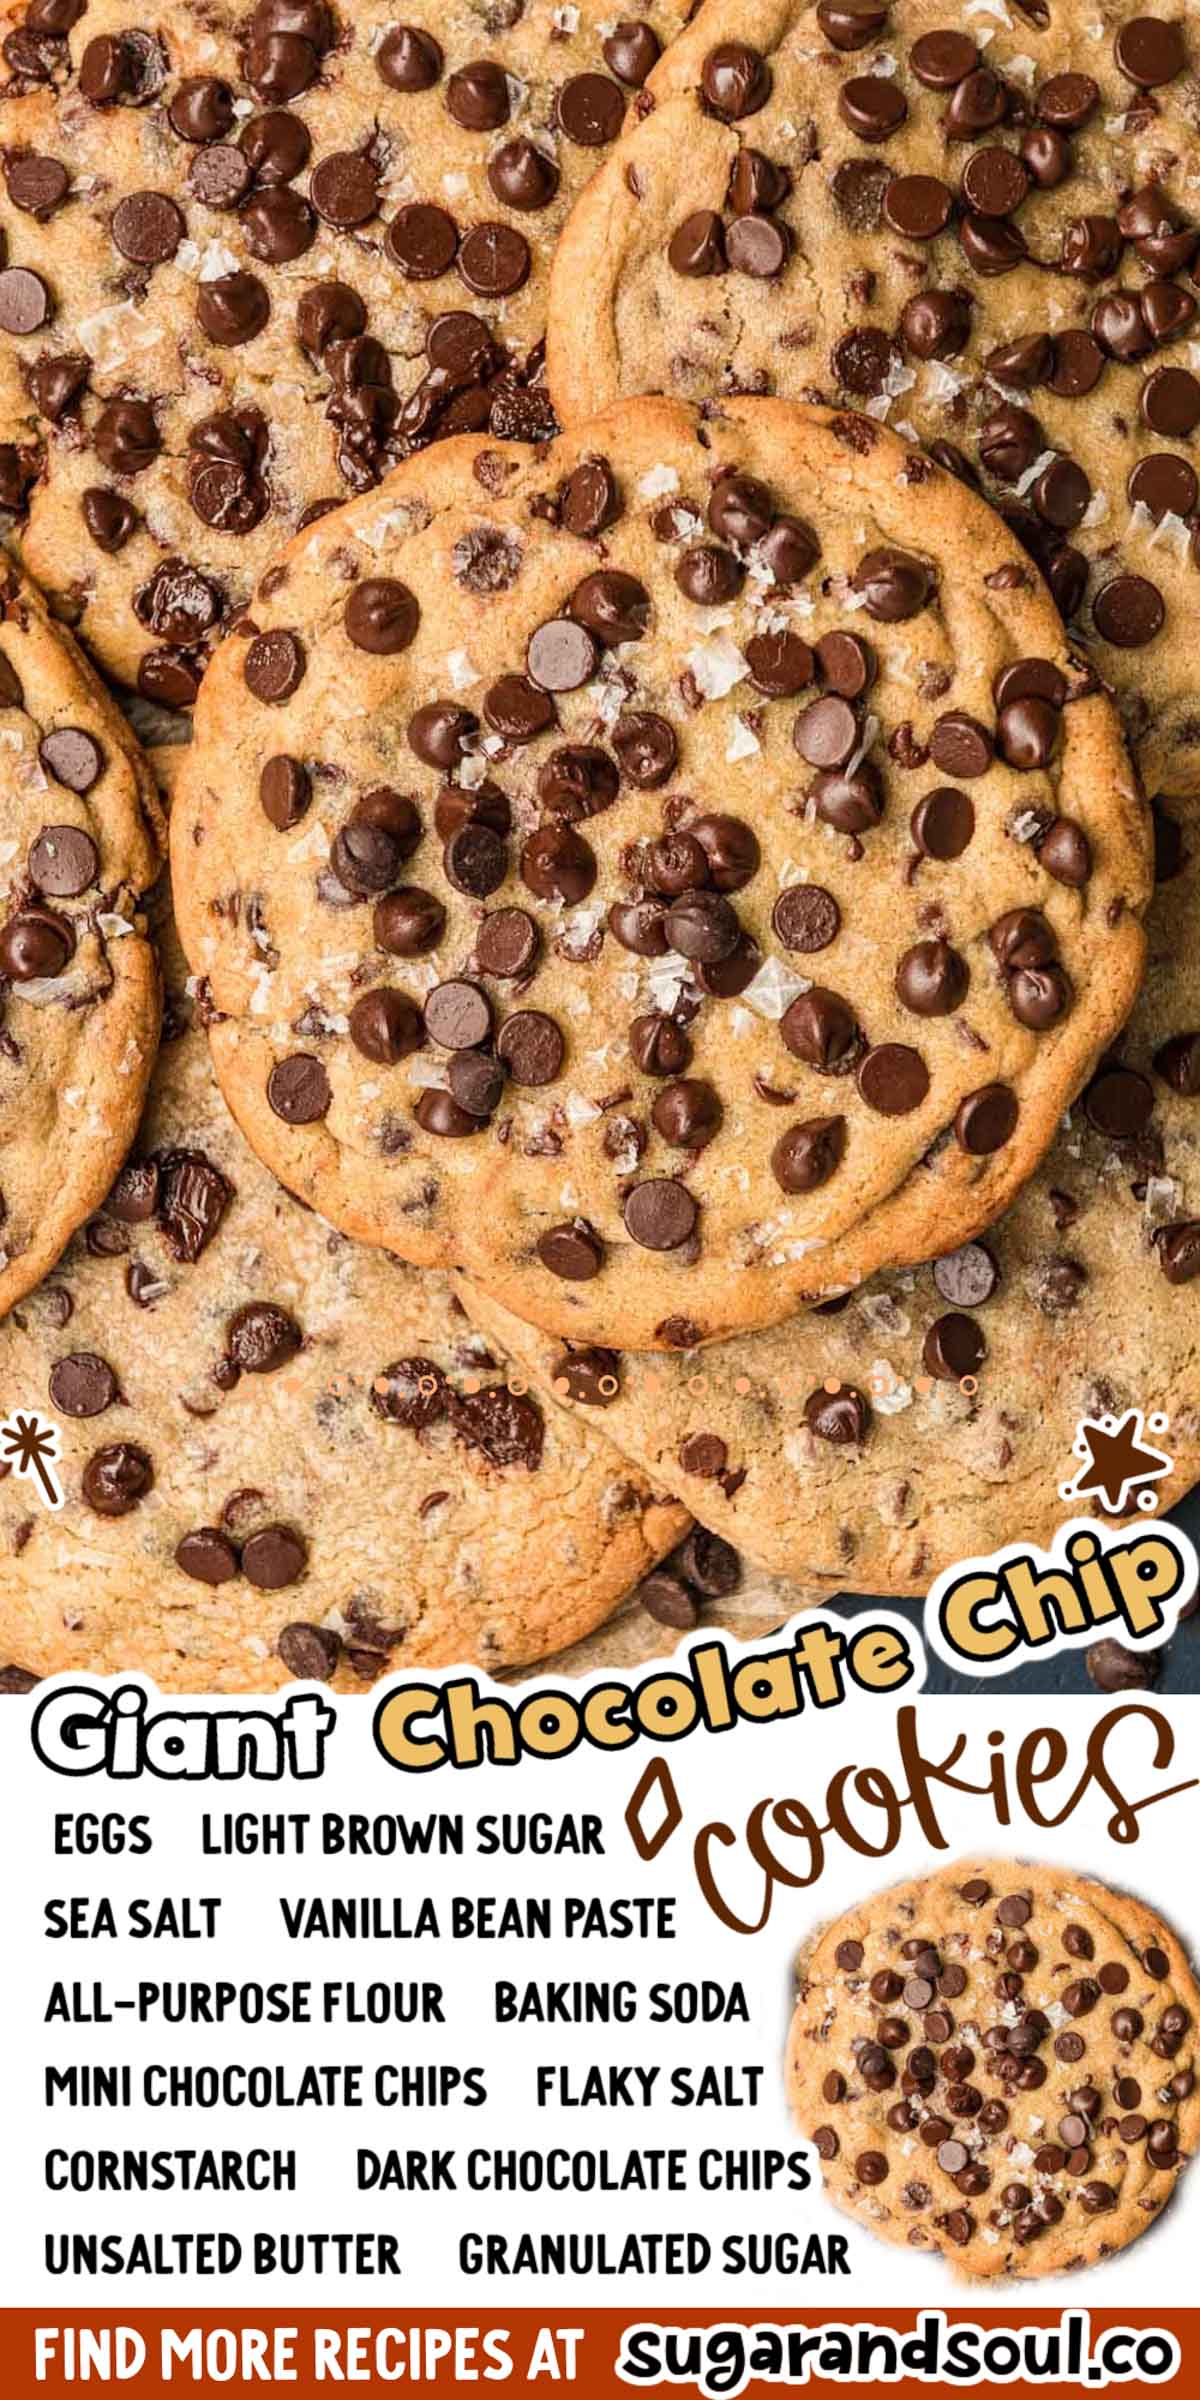 Giant Chocolate Chip Cookies are deliciously soft and chewy treats that are made with pantry staple ingredients and a mixture of chocolate chips! No need to chill the dough for these EPIC cookies! via @sugarandsoulco